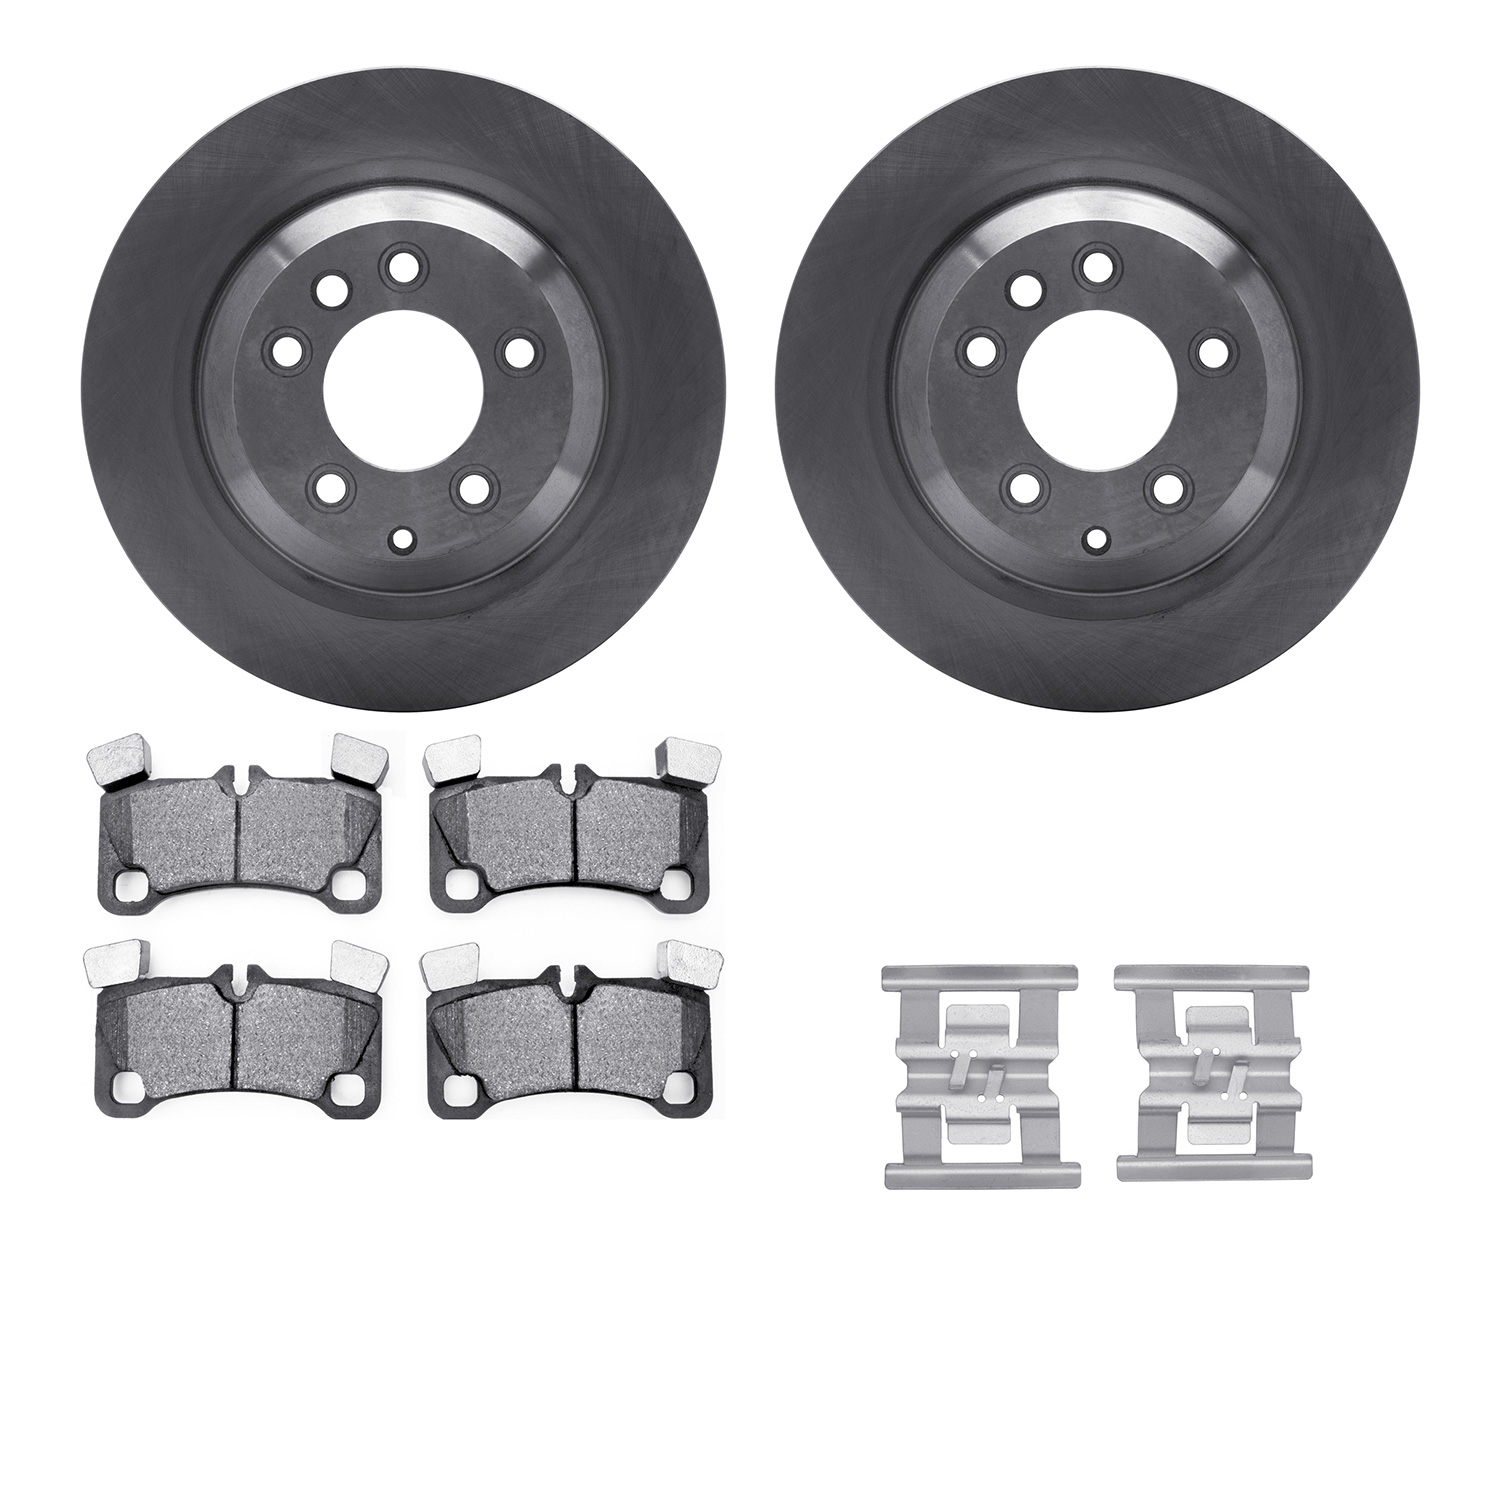 6312-02018 Brake Rotors with 3000-Series Ceramic Brake Pads Kit with Hardware, 2008-2010 Multiple Makes/Models, Position: Rear